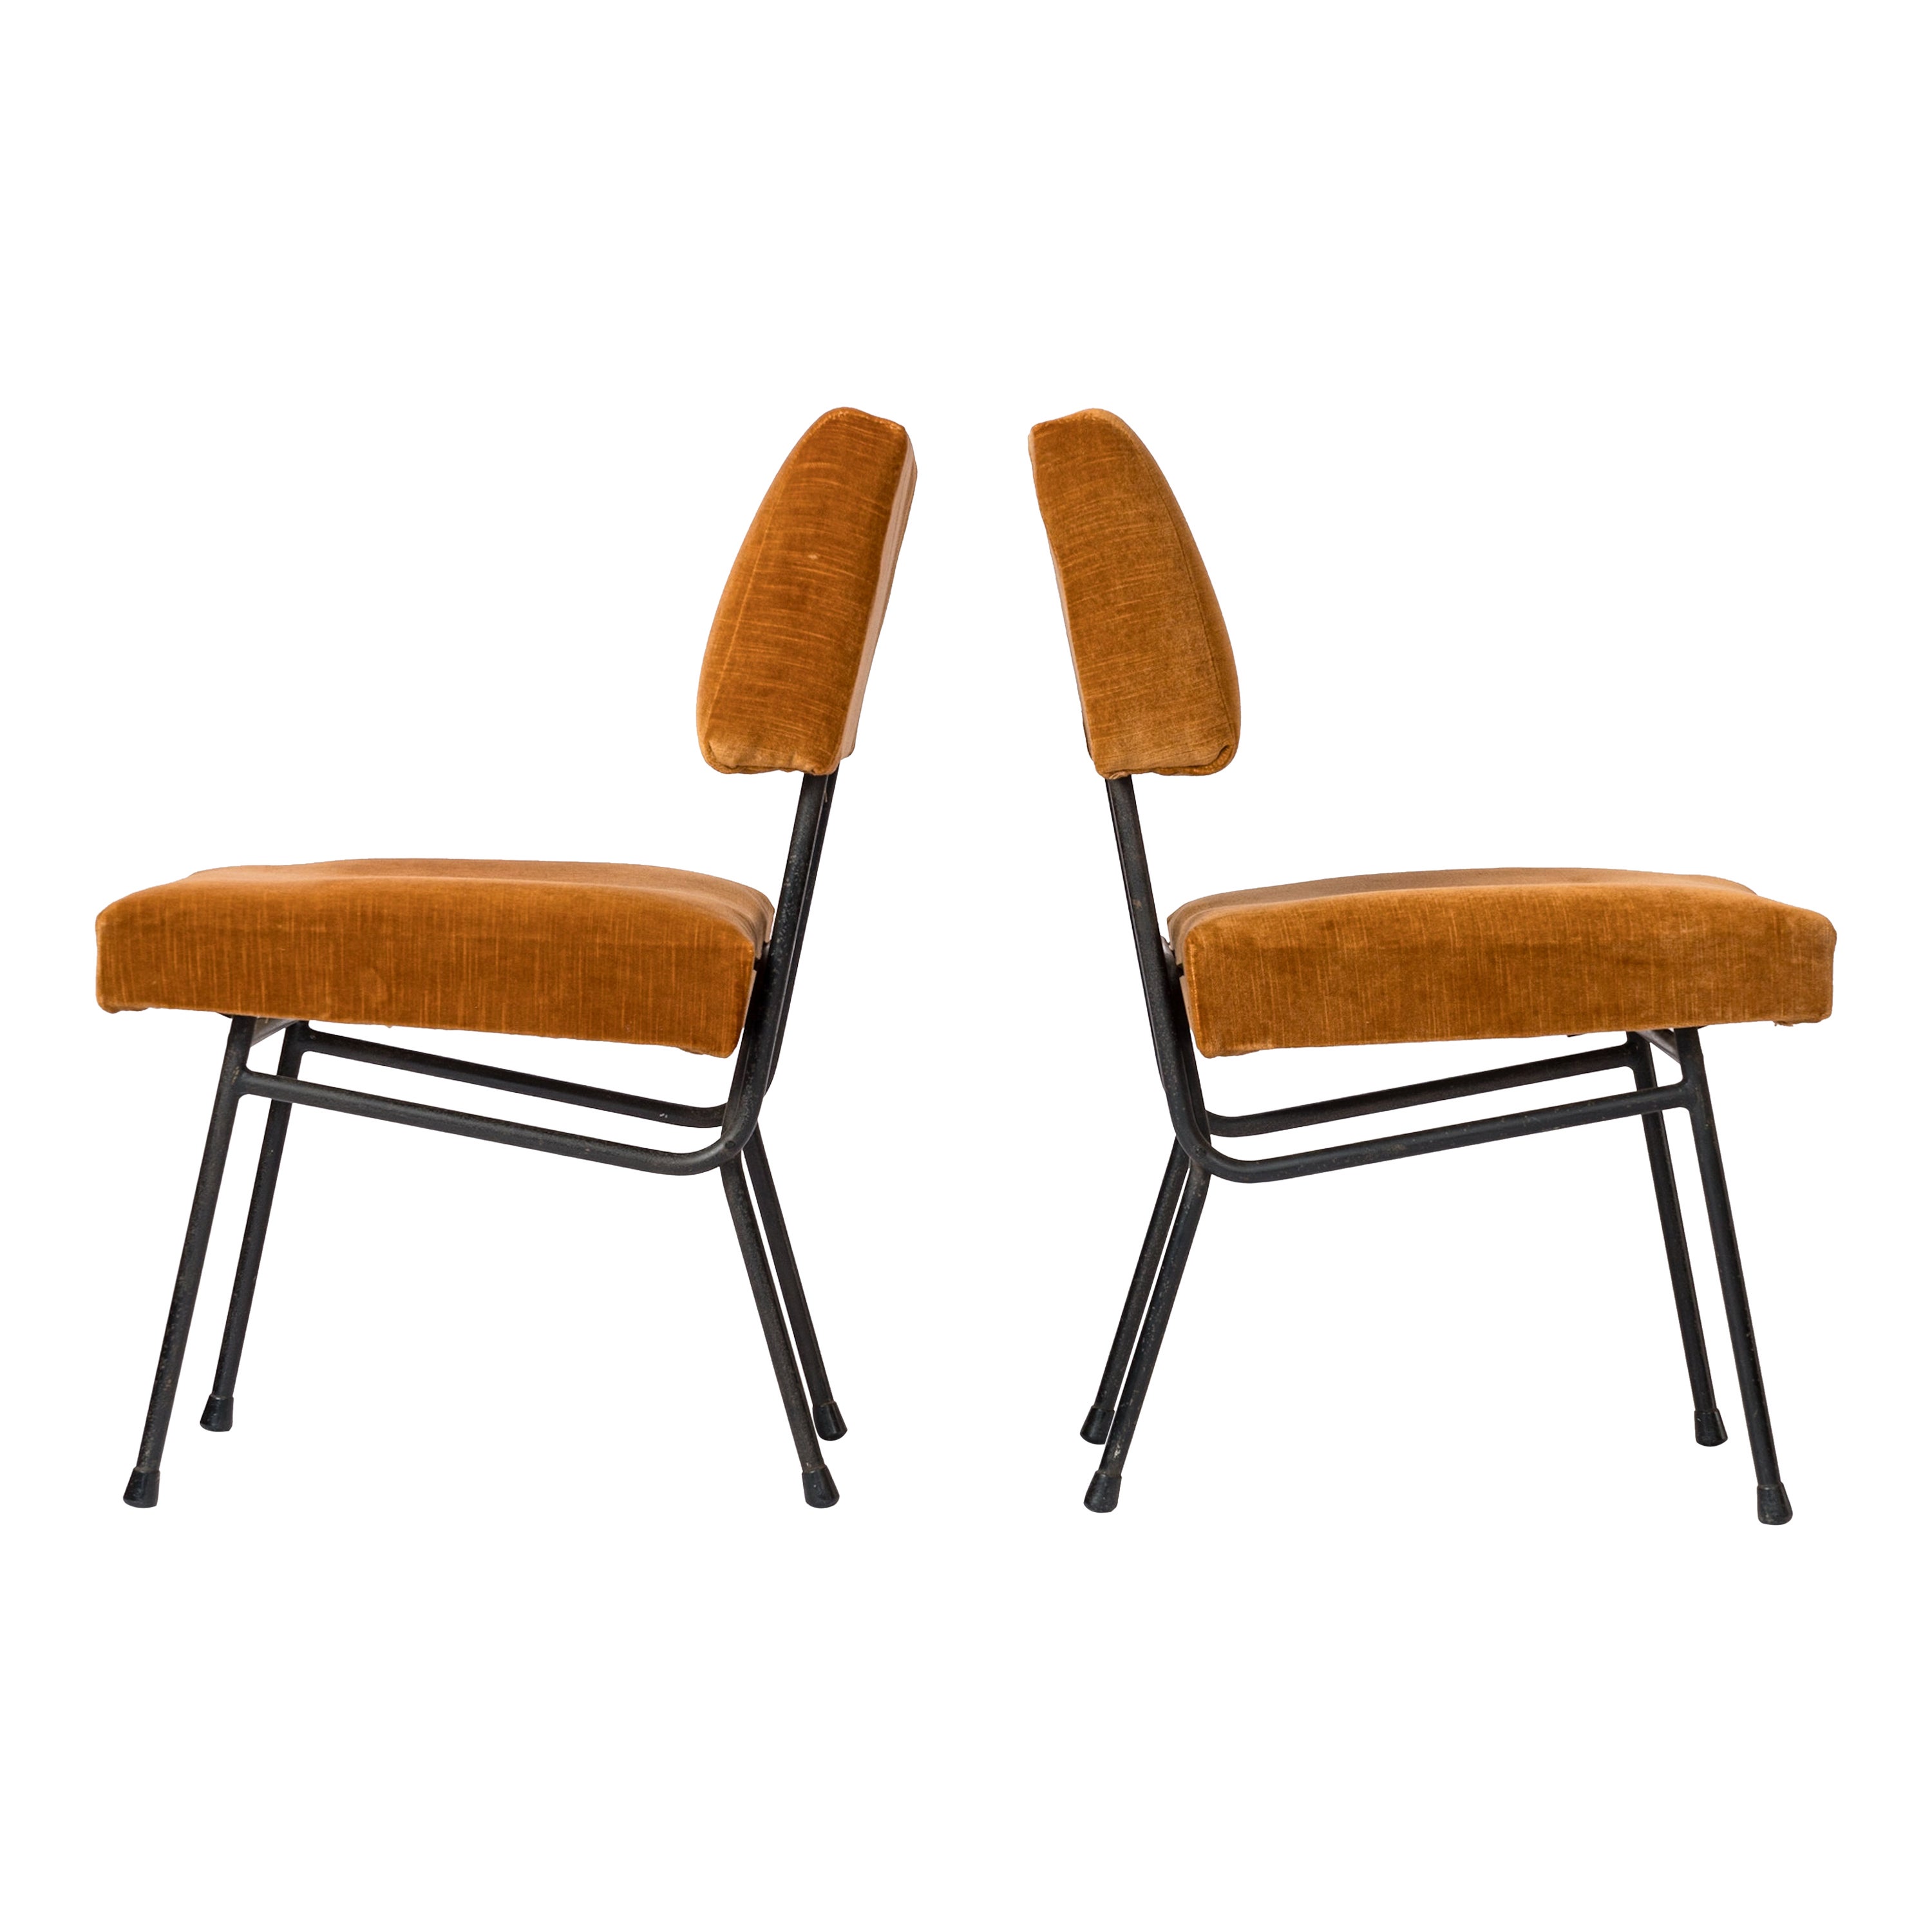 Pair of Marigold Velvet Adjustable Chairs att. Pierre Guariche - France 1960's For Sale